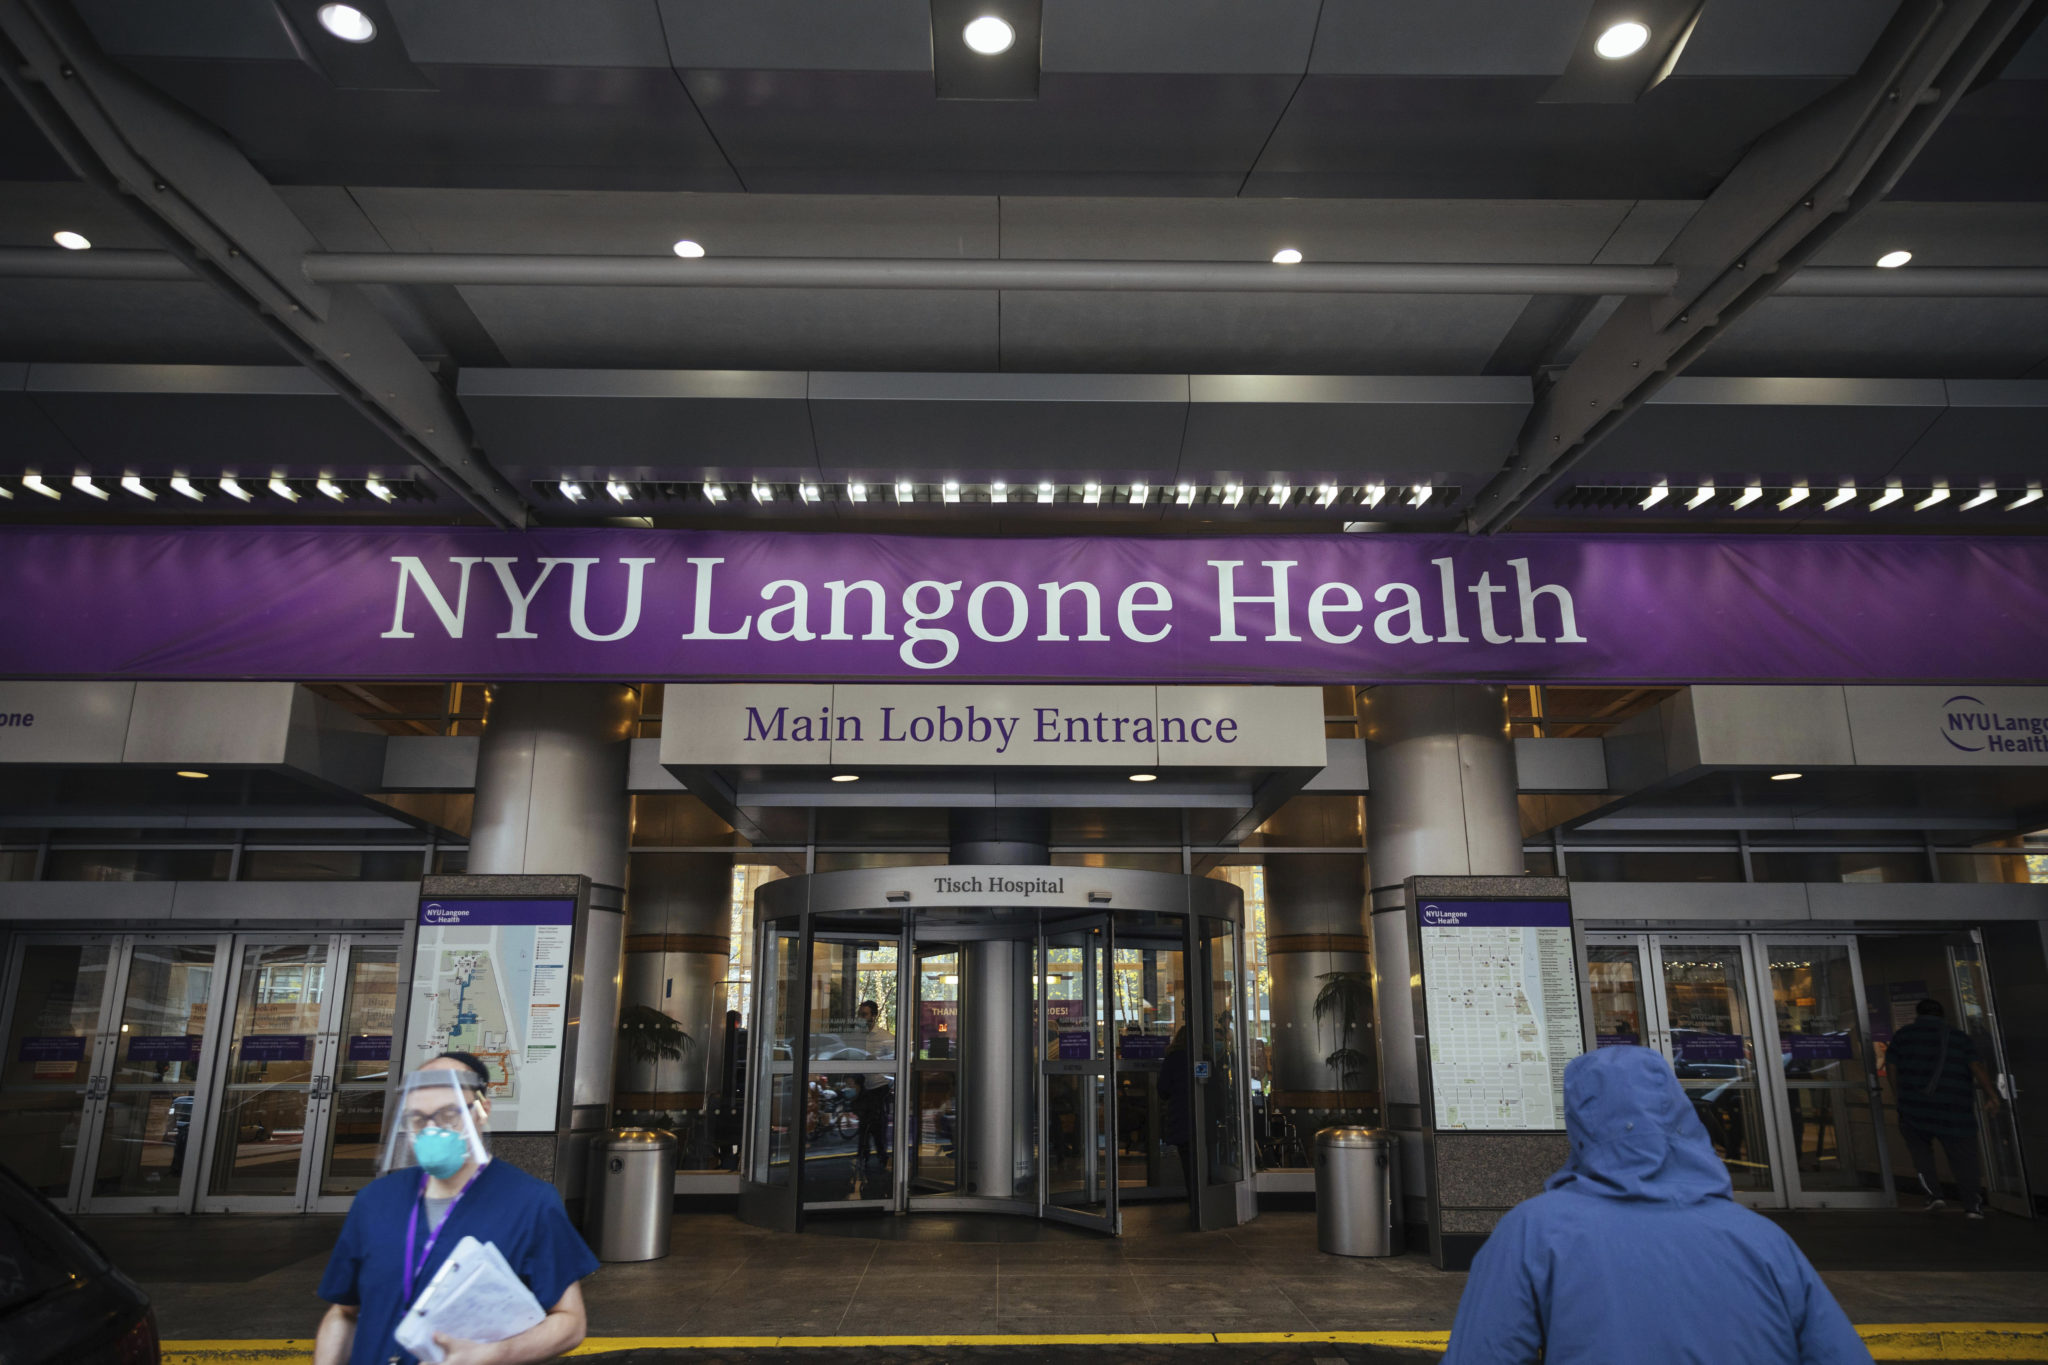 NYU Langone Health ranks no. 1 in New York State and No. 3 in the nation